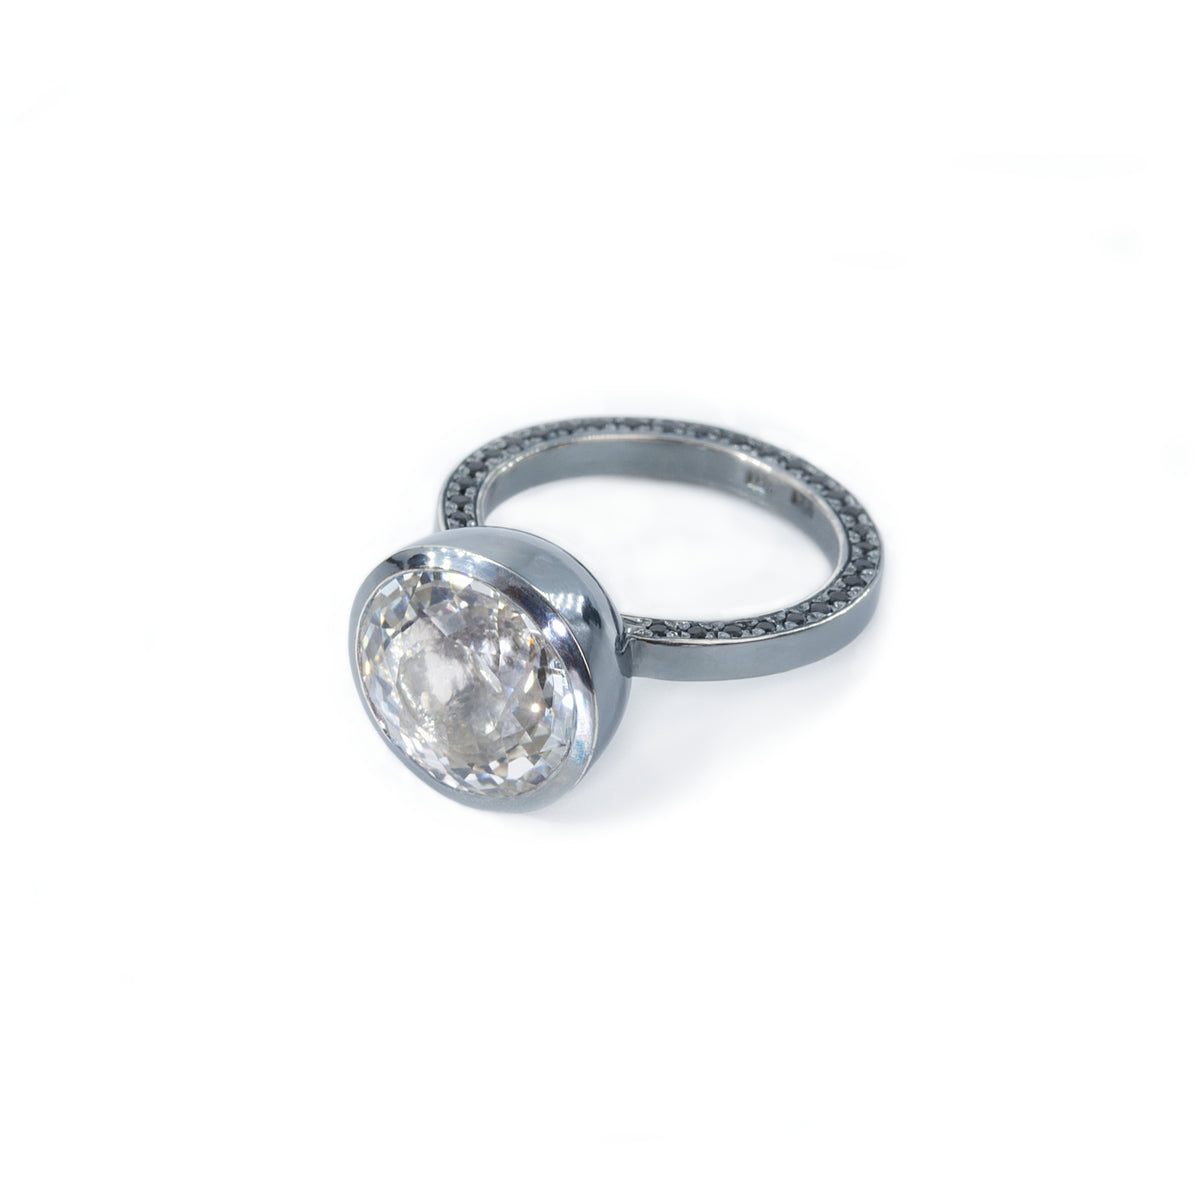 On a white background in the middle is placed ring with a huge white stone (topaz) as a focal. The shank of the ring is set with black stones (spinel). Ring is made by Ewa Z. Sleziona Jewellery. 